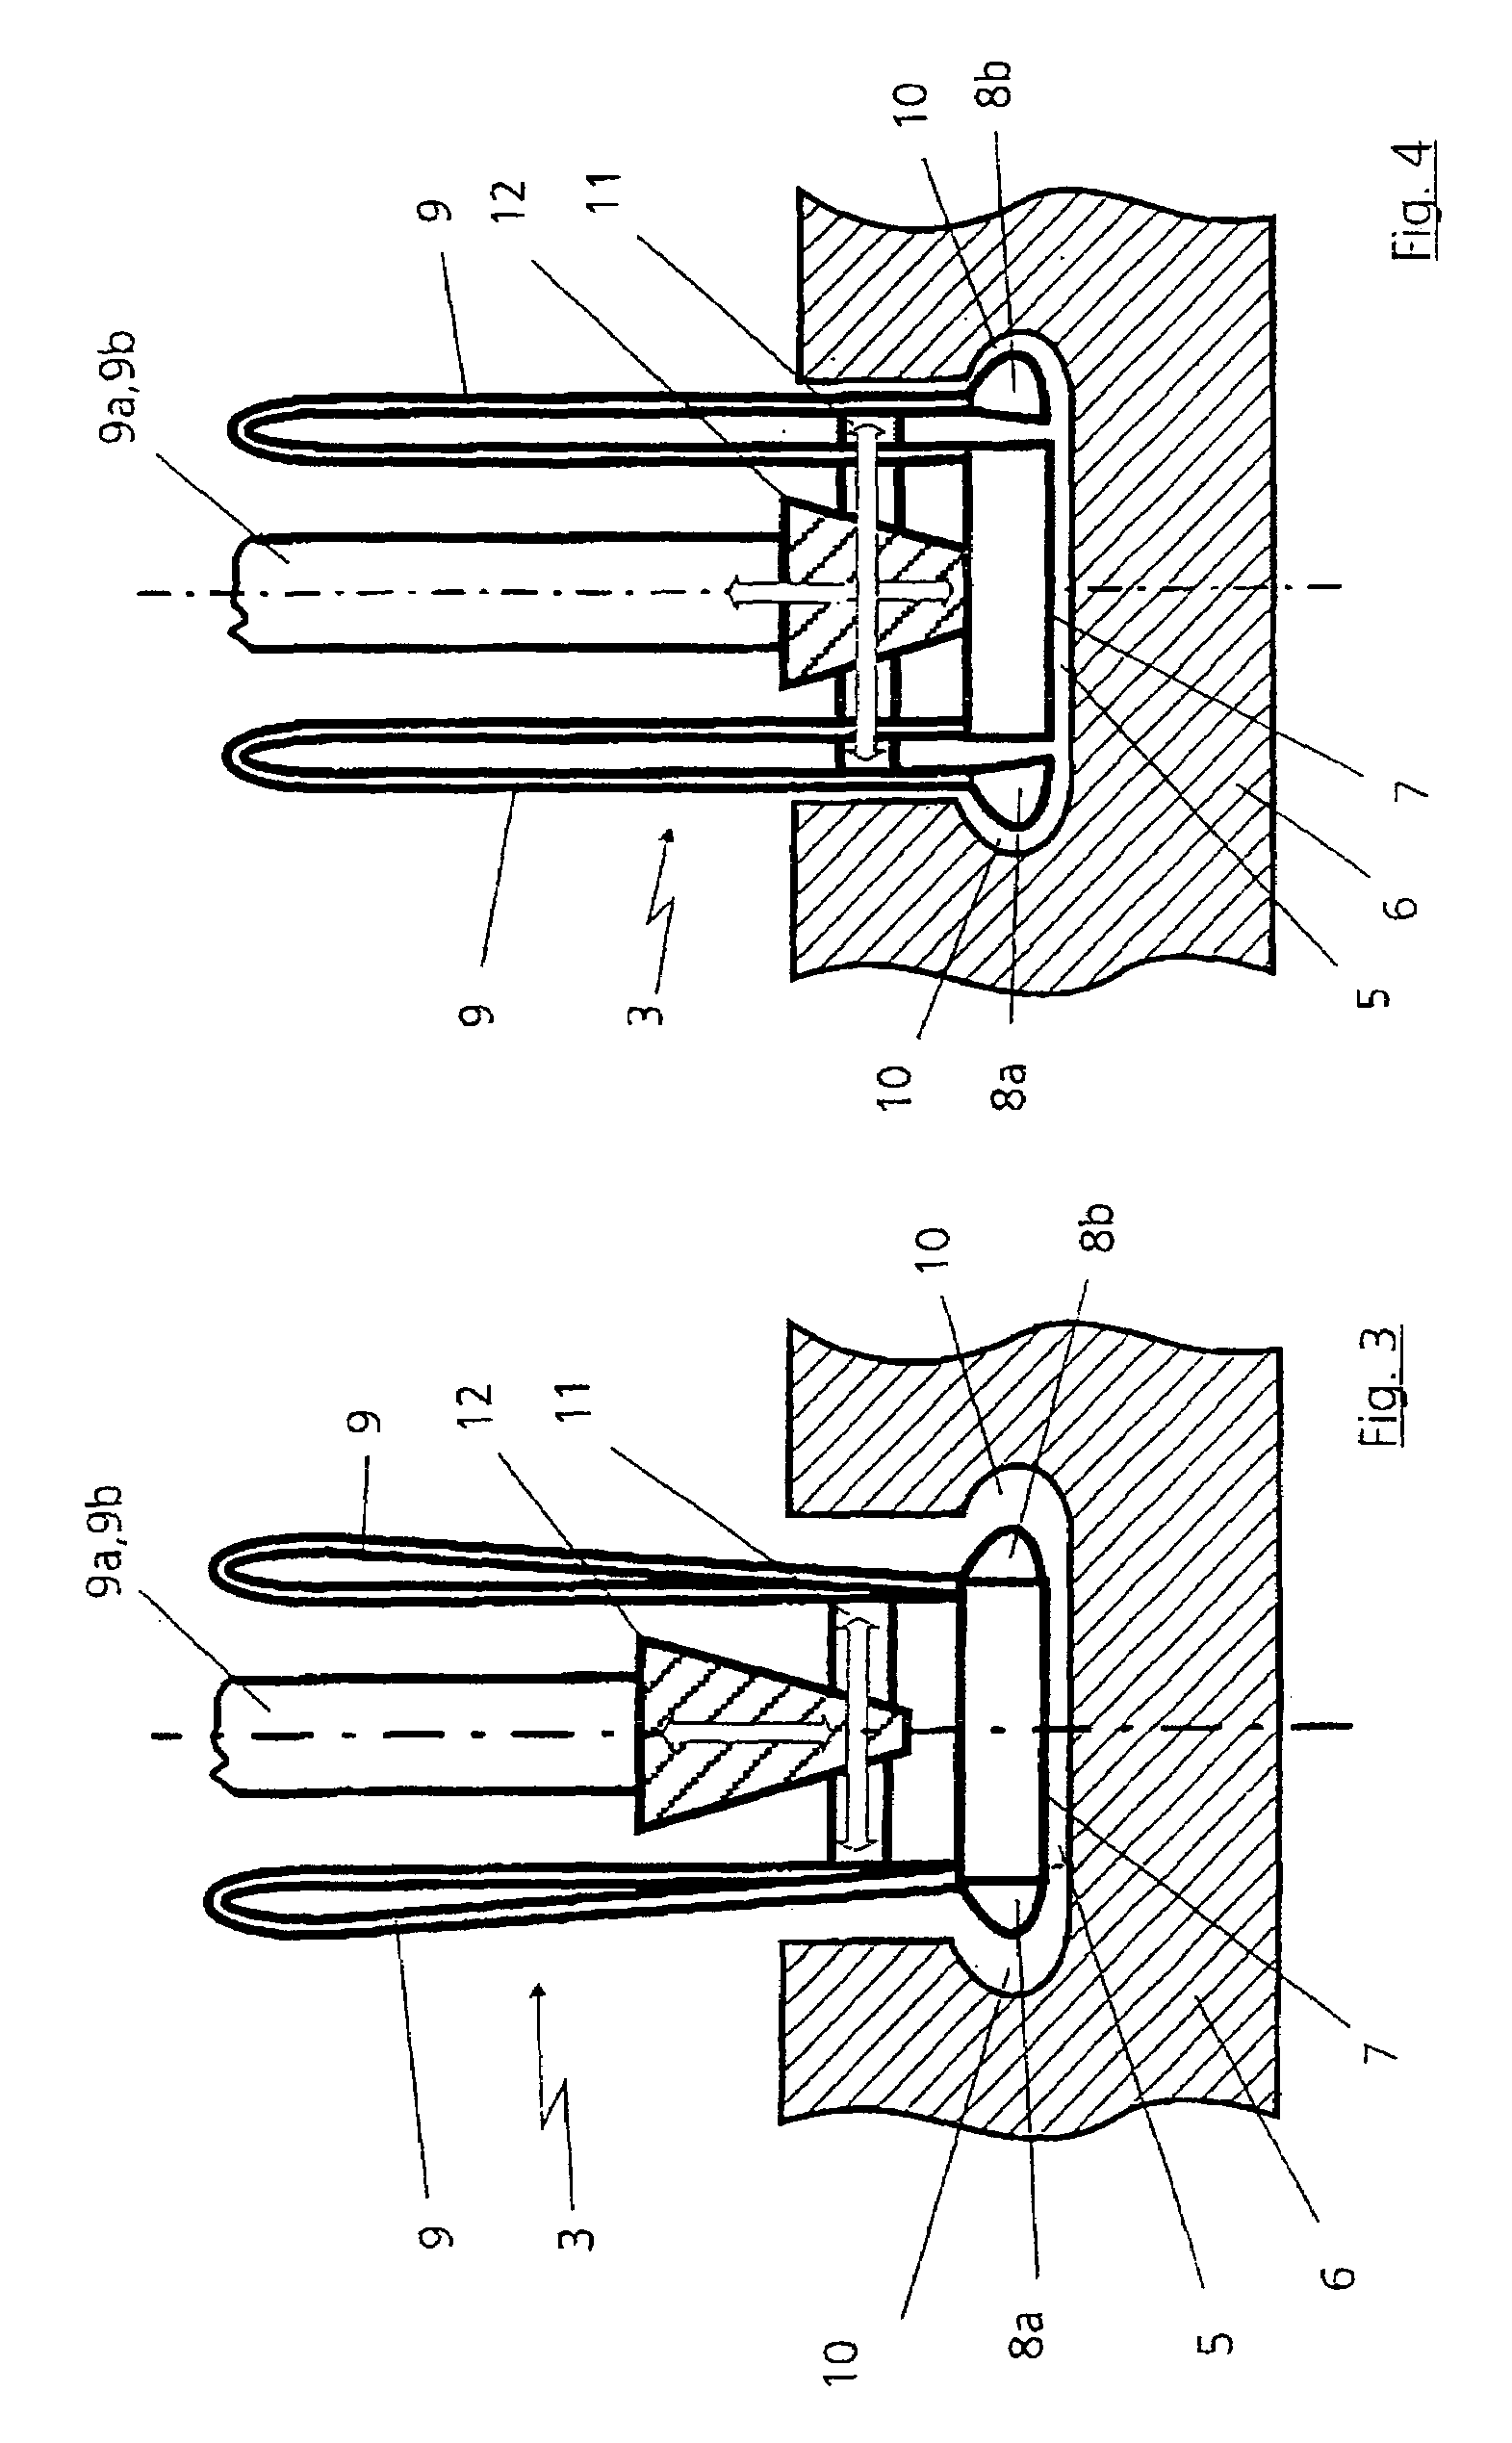 Apparatus for hardening a cylindrical bearing on a shaft by means of induction heating utilizing an elastic element